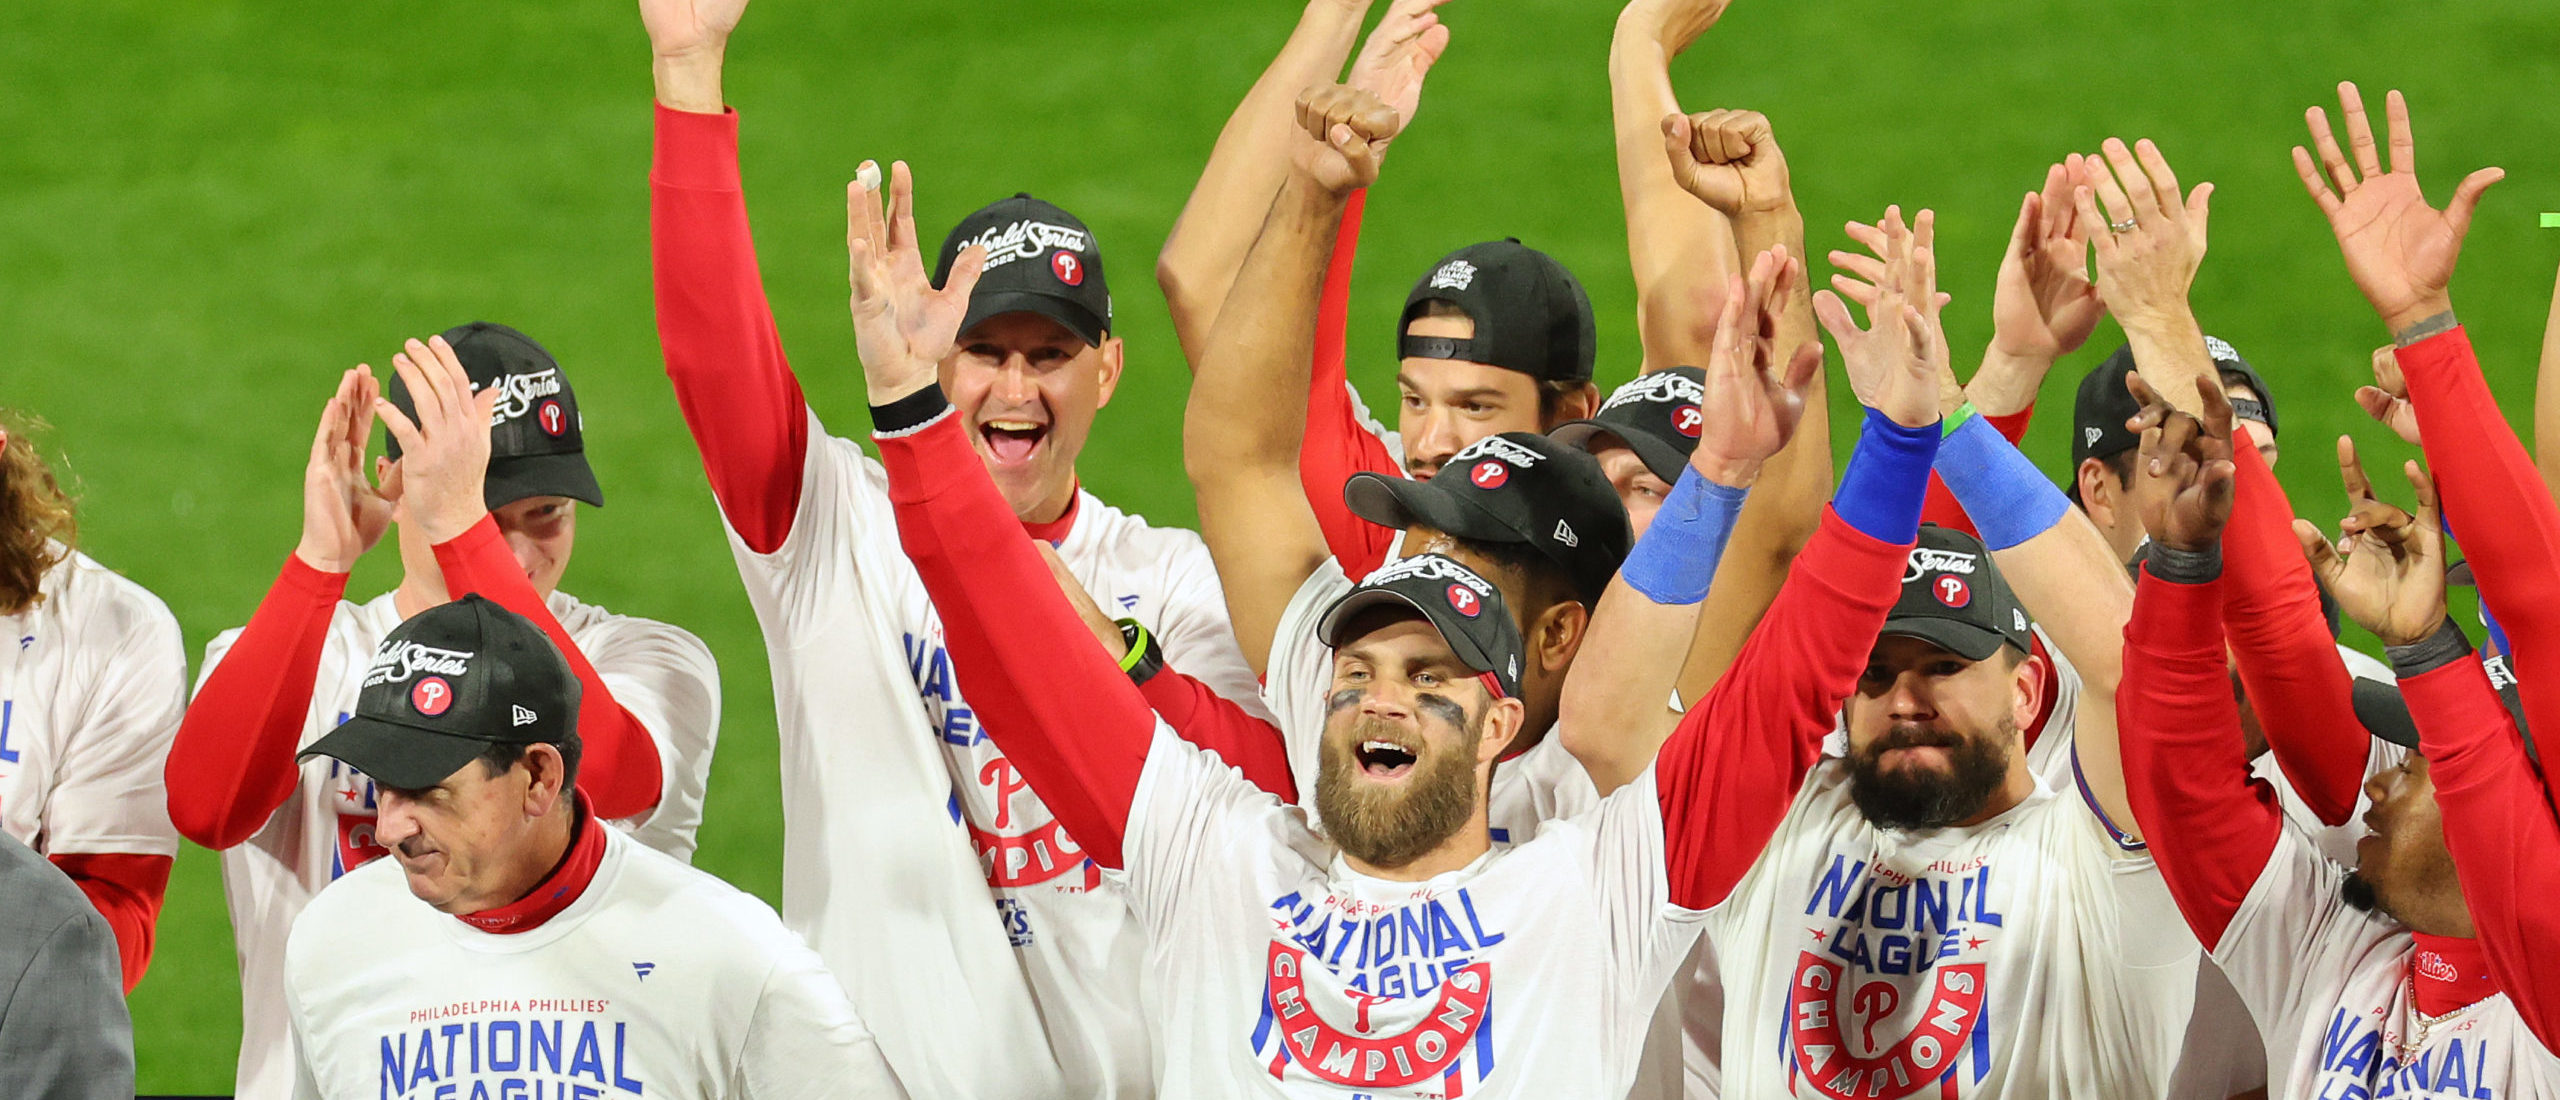 The Phillies are one win away from the World Series – NBC Sports  Philadelphia